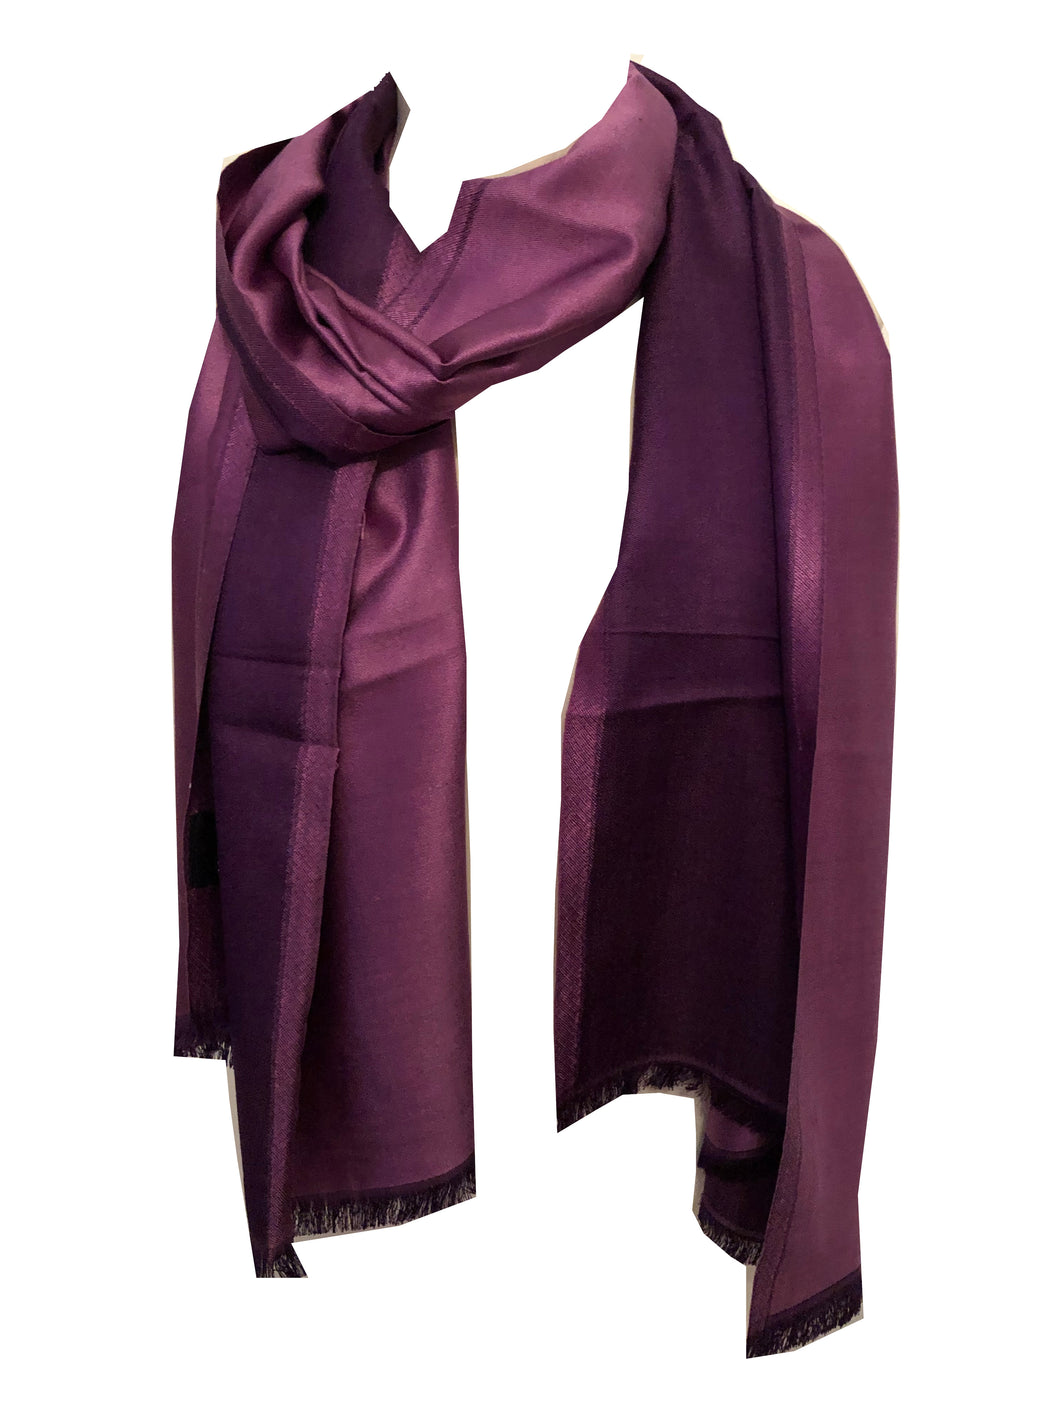 Dark and Light Purple Reversible 100% Silk Scarf/wrap with Slightly Frayed Edge Lovely Long Scarf